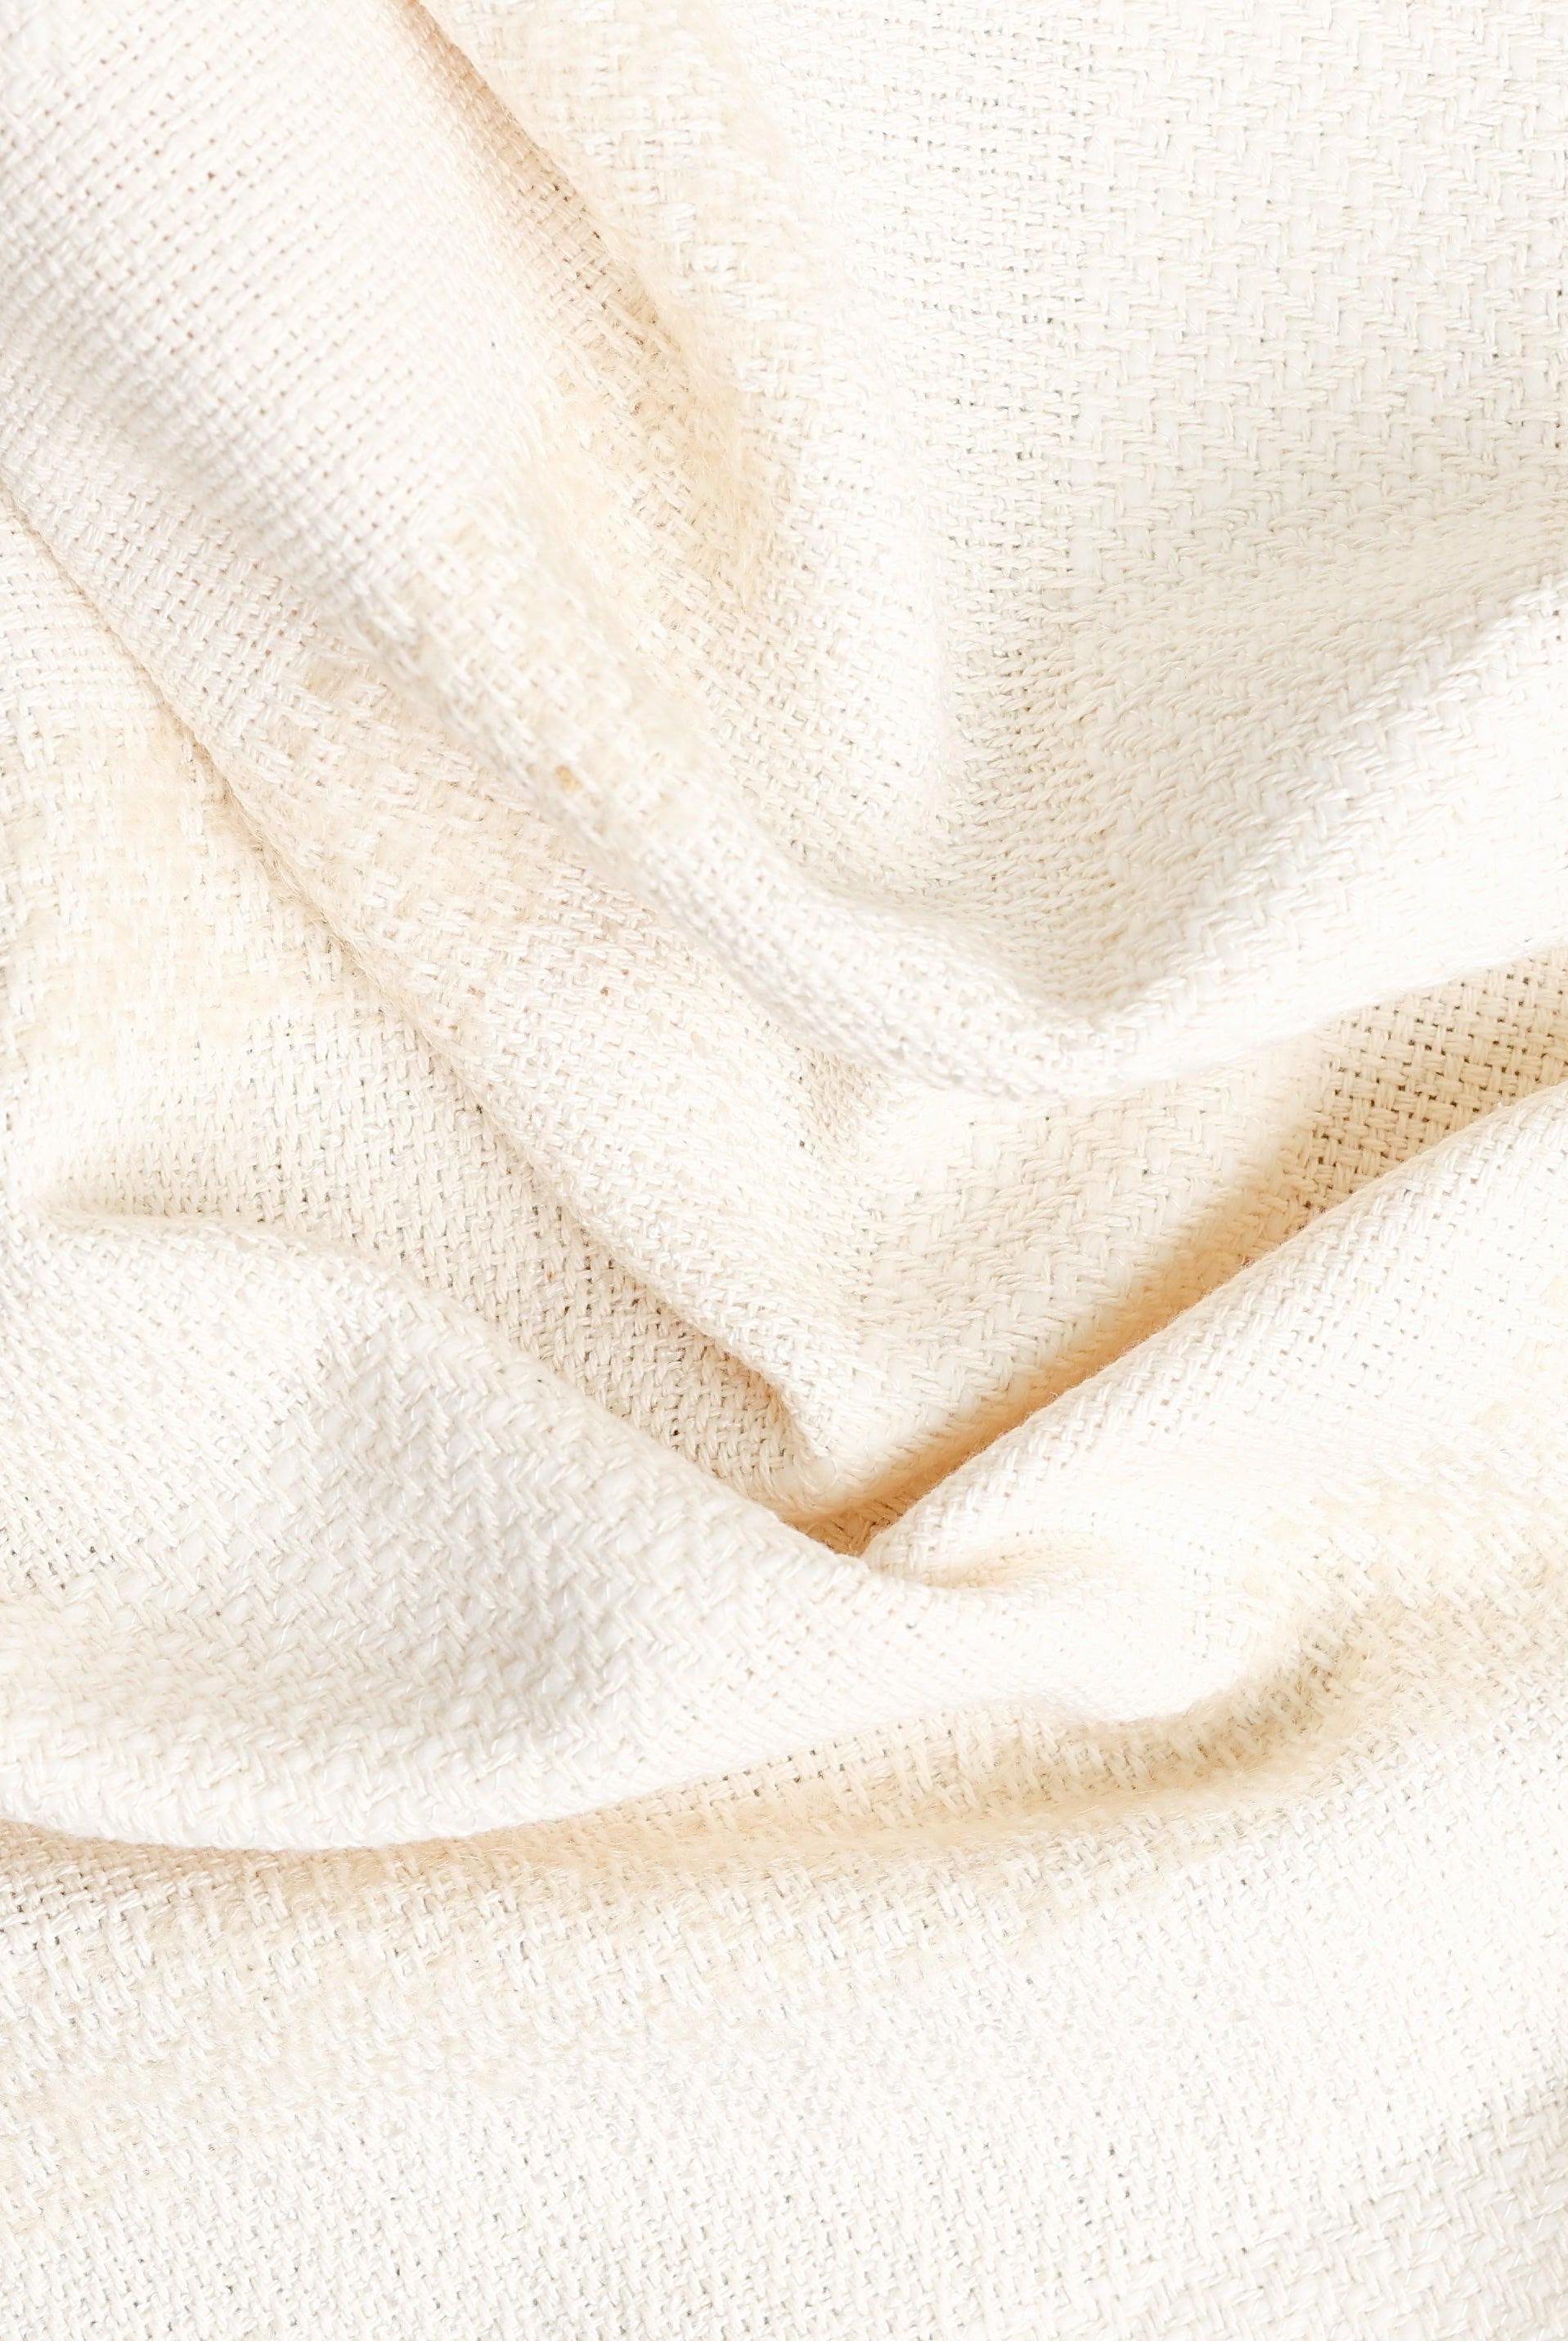 TEXTURED BOUCLE SOLID THROW - Boucle Home